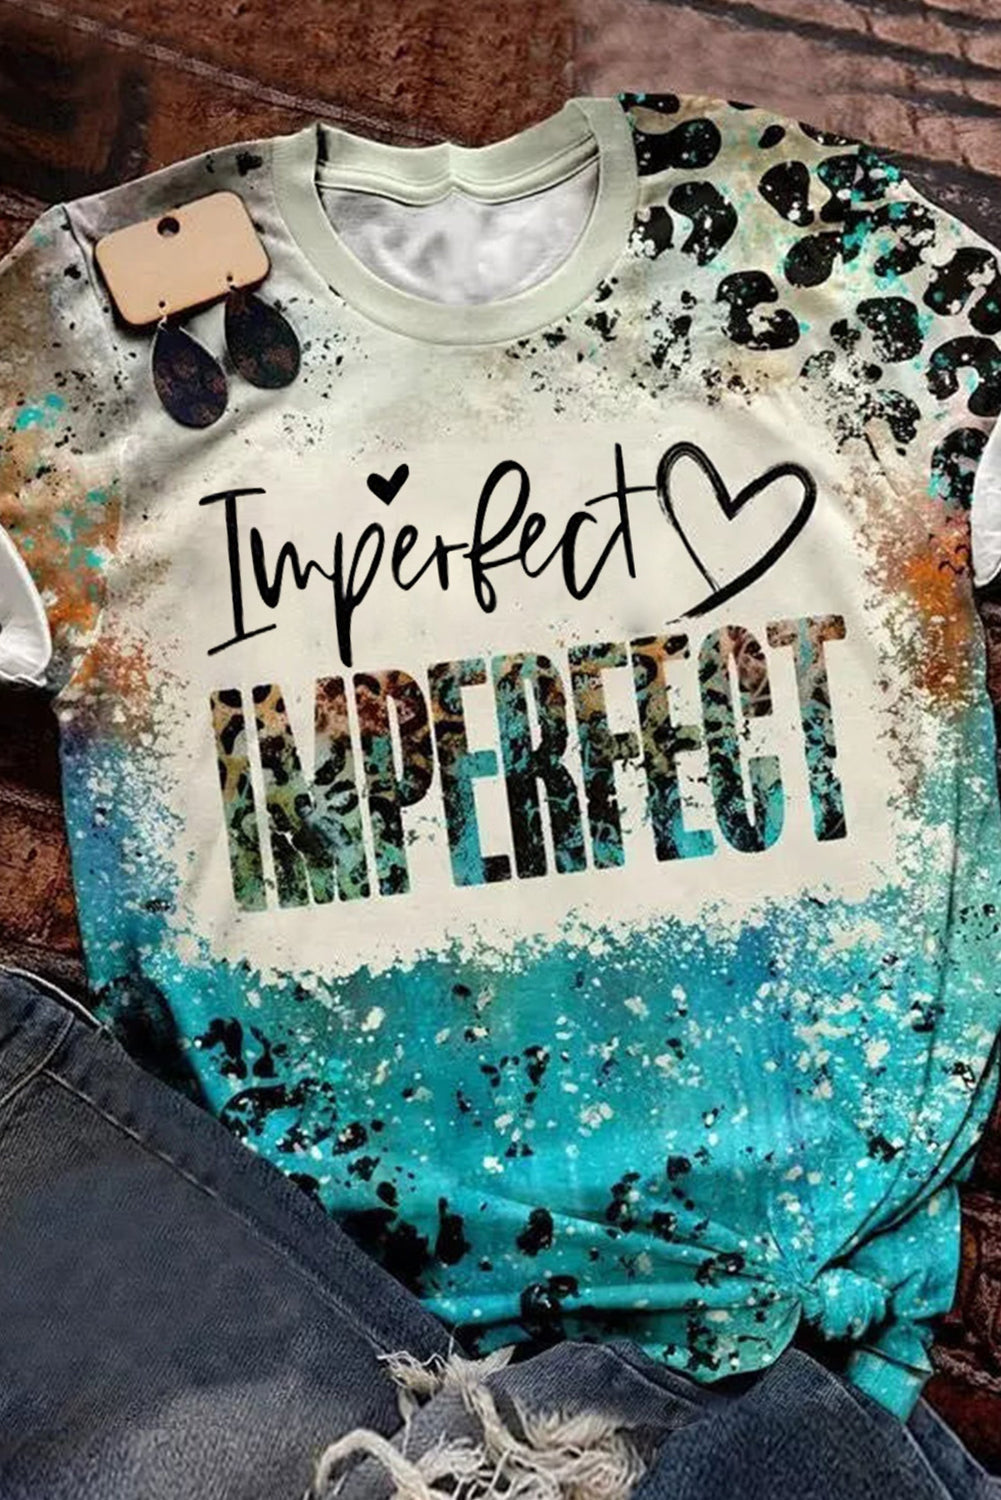 Sky Blue Imperfect Western Fashion Letters Graphic Tee